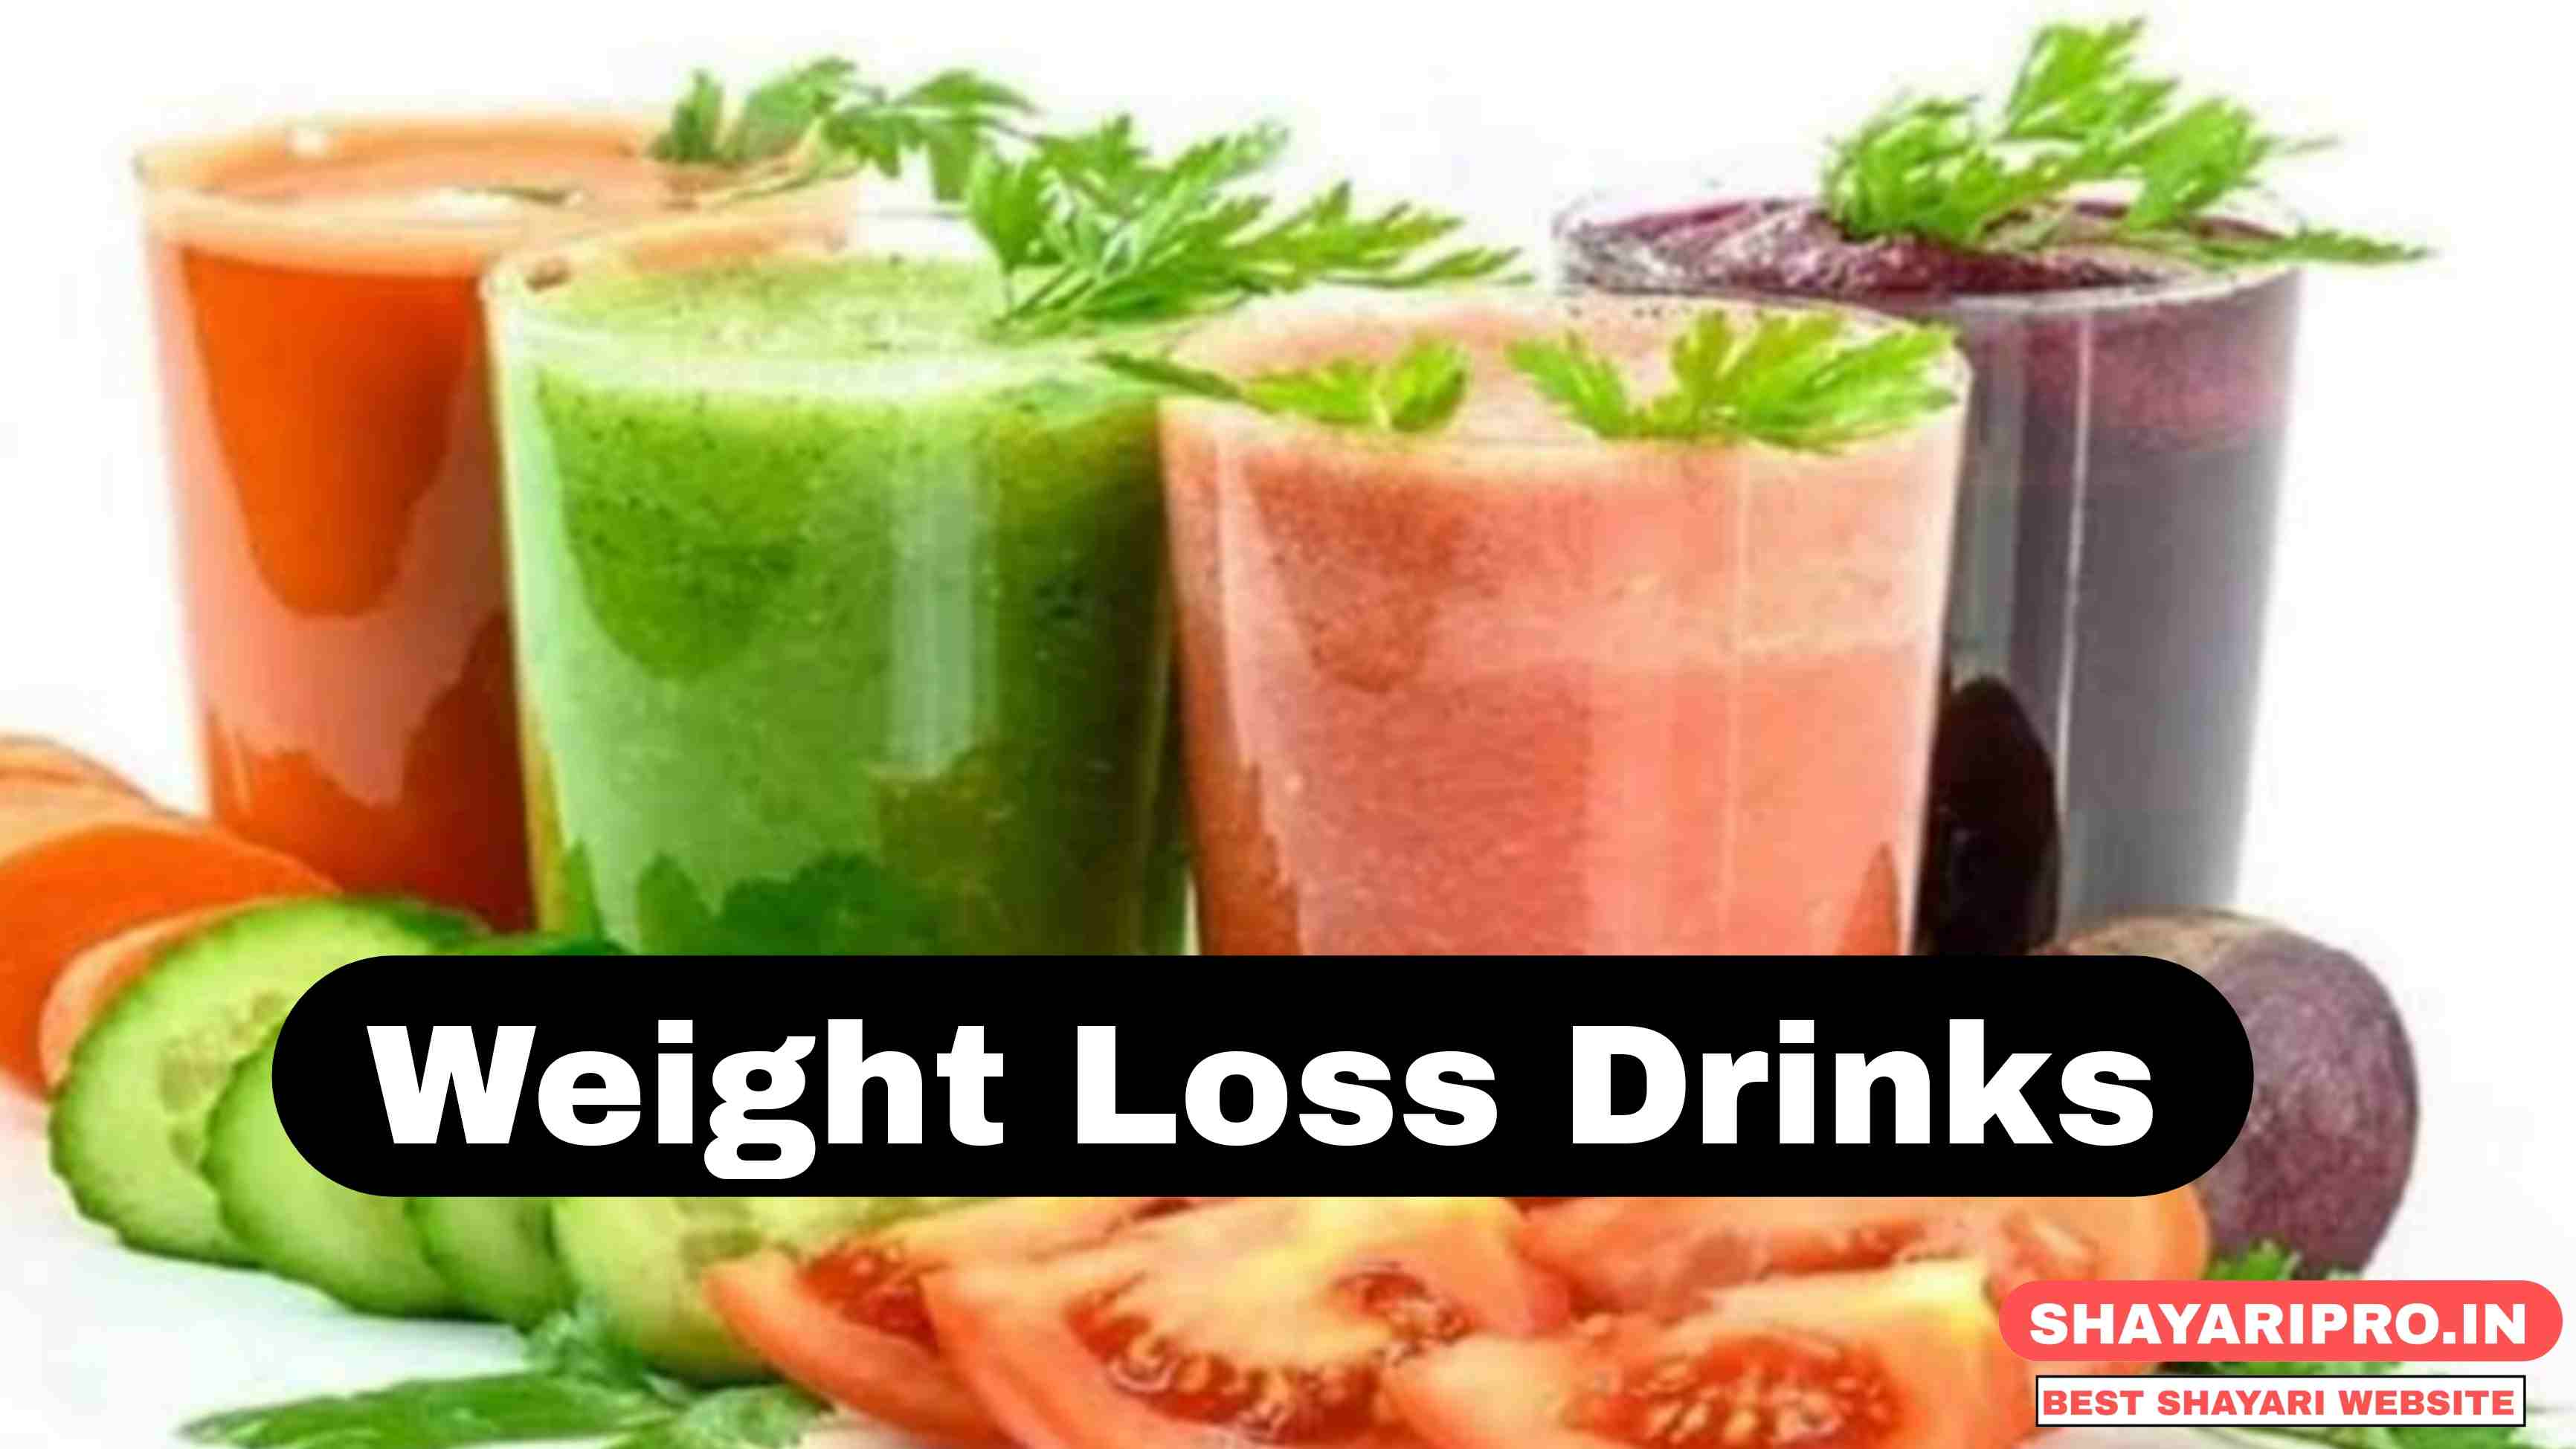 Weight Loss Drinks